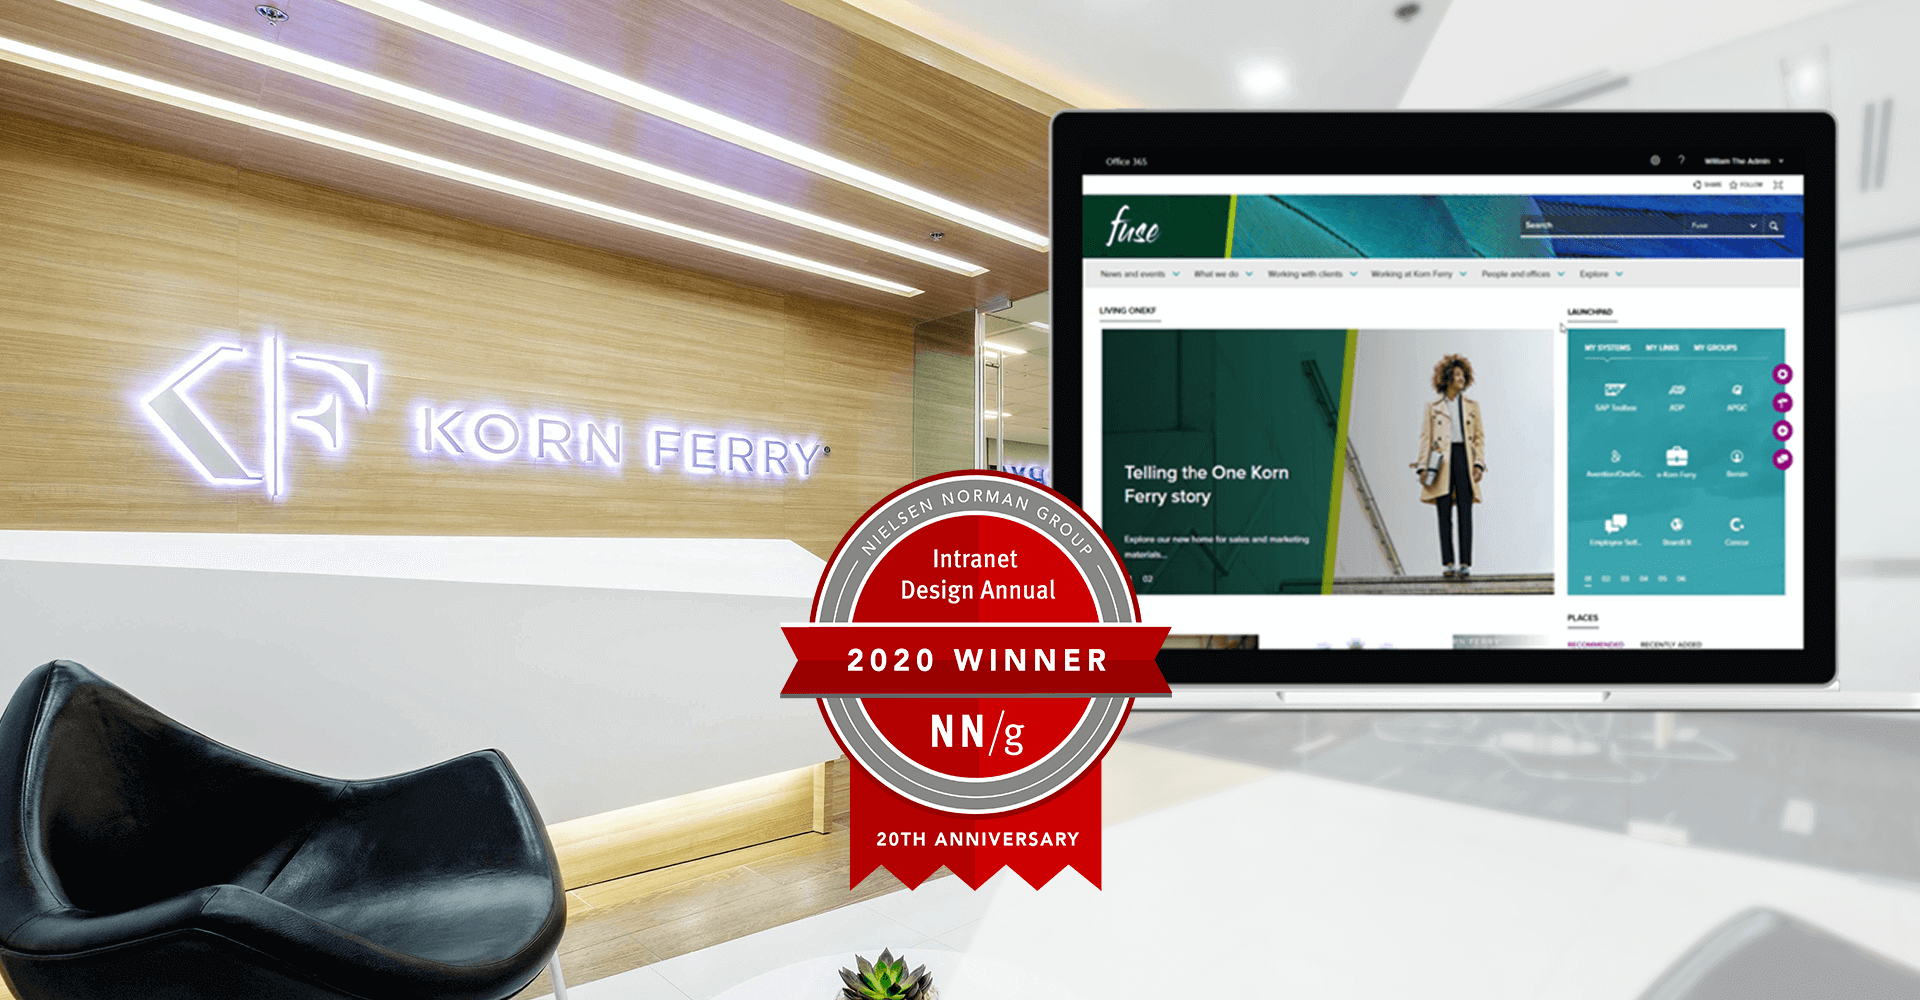 Korn Ferry office with NNG Intranet Design Annual Award overlay